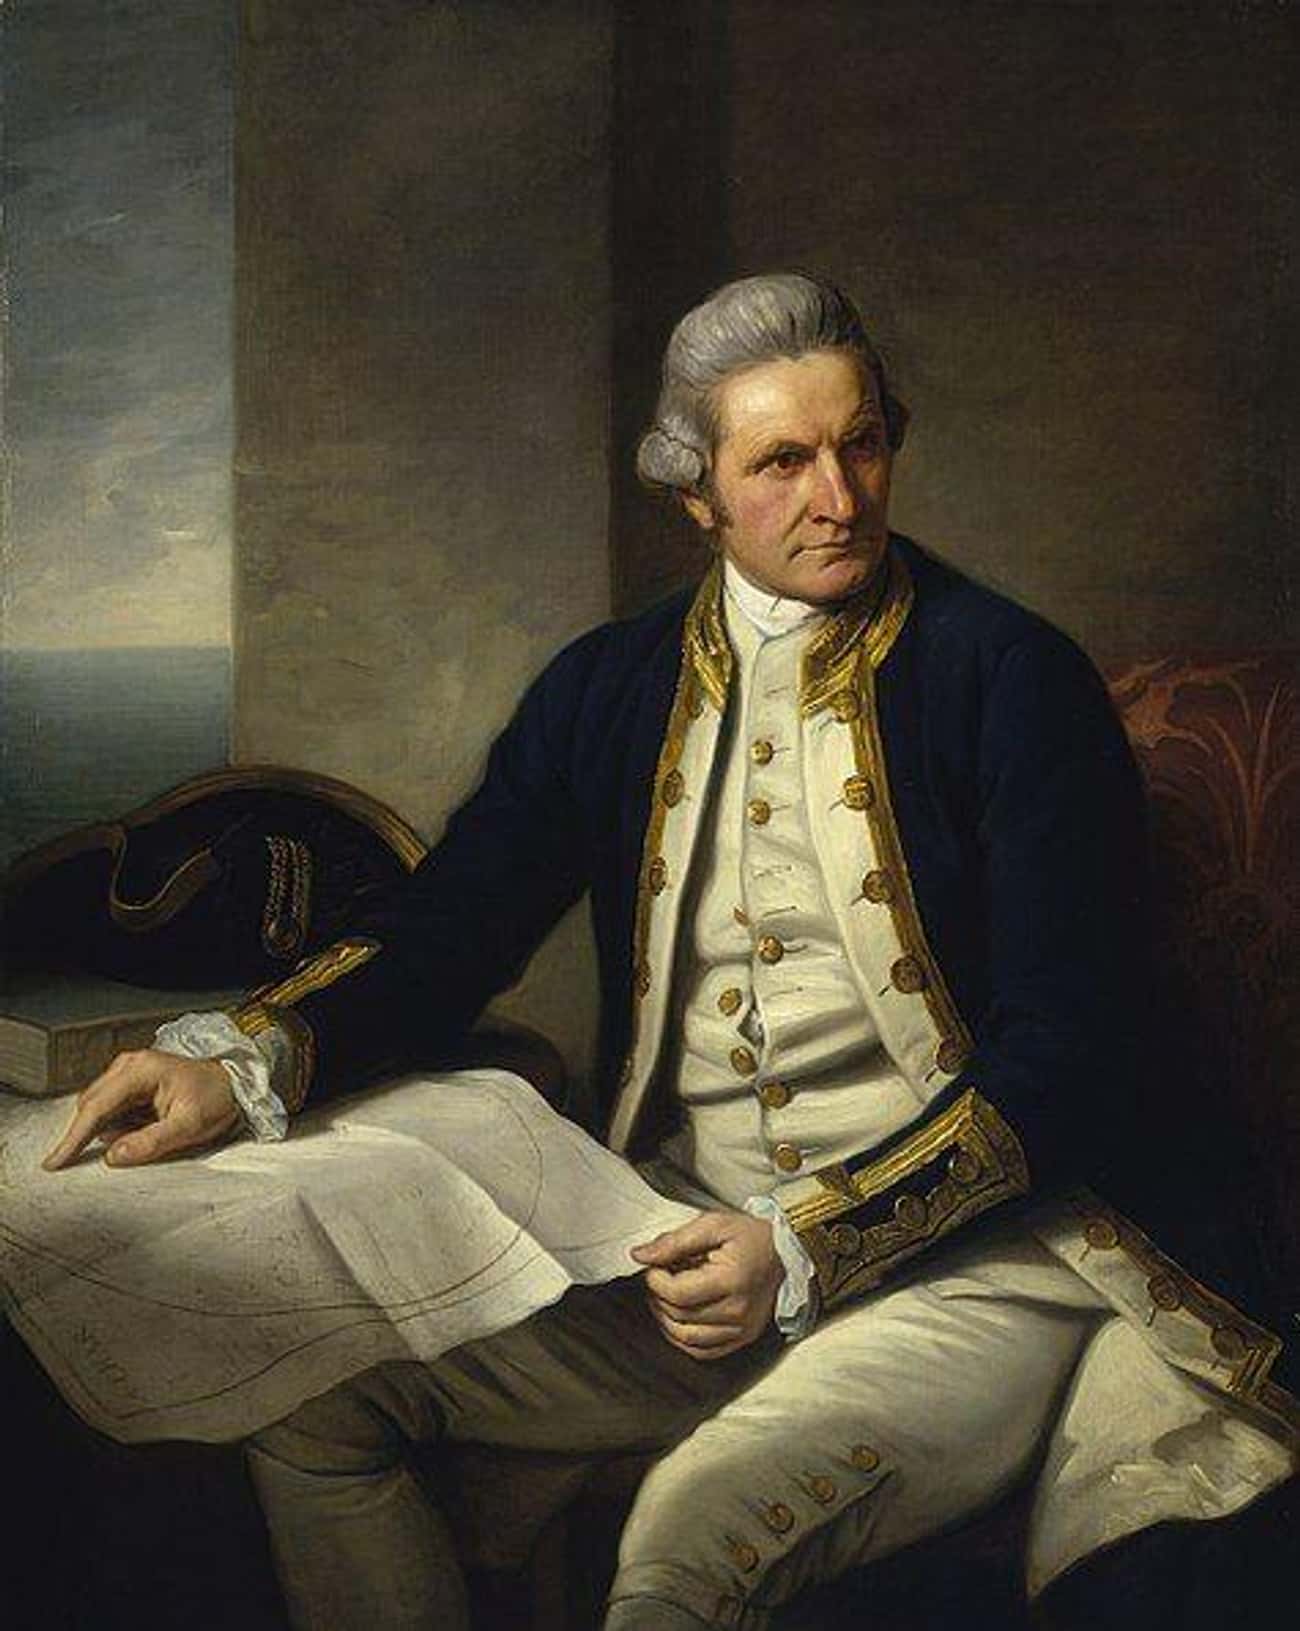 European James Cook Sailed To Hawaii In 1778 And Attempted To Kidnap The Native King